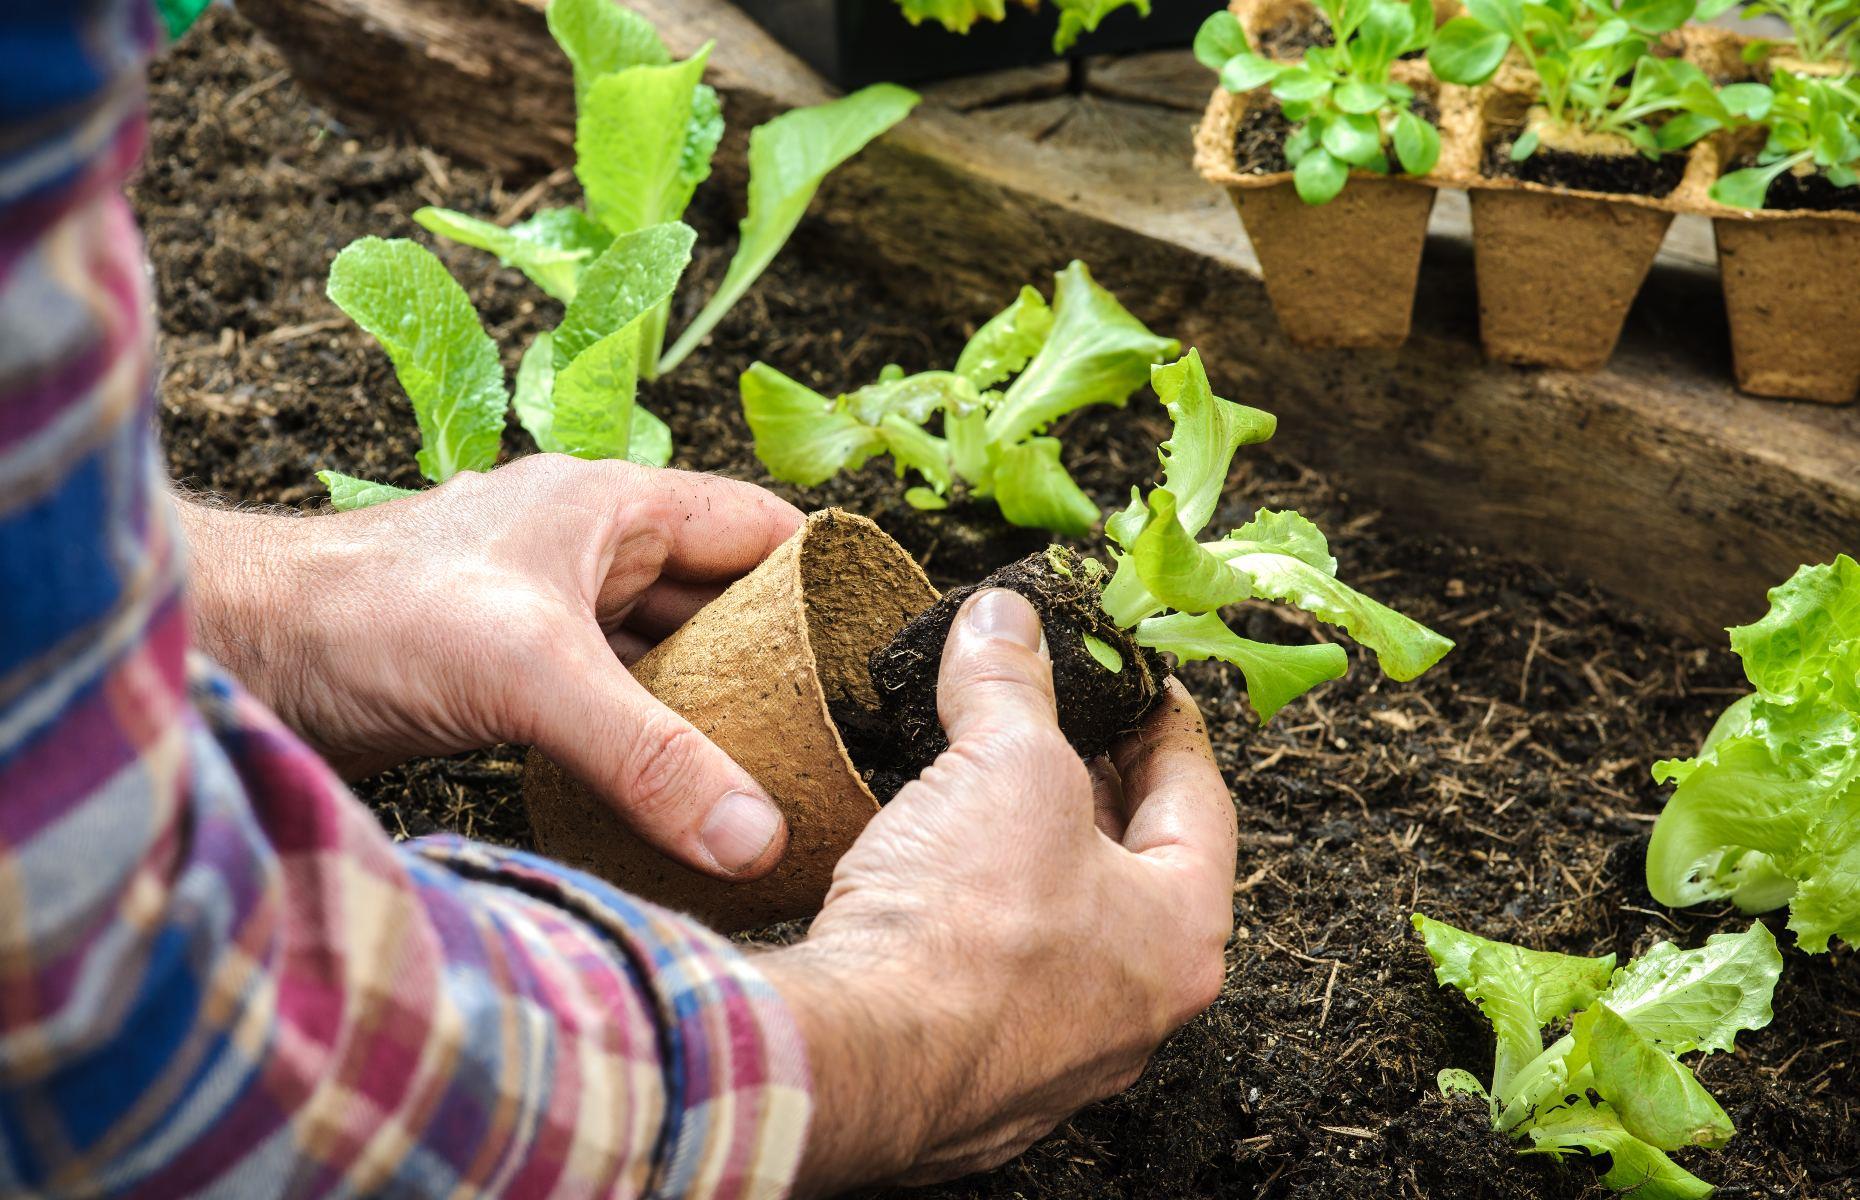 <p>If possible, start off vulnerable plants, such as salad leaves and courgettes, indoors in pots and plant them outside when they are big enough to withstand cold and attack from garden pests. Before you plant them outdoors, seedlings will need to be hardened off, say the <a href="https://www.rhs.org.uk/Advice/Beginners-Guide/Vegetable-basics/Seed-sowing-techniques">RHS</a>, so that they acclimatize to the temperature. Move them first to a warm sheltered position outside during the day, bringing them in at night, before gradually moving them outside over a period of about ten days.</p>